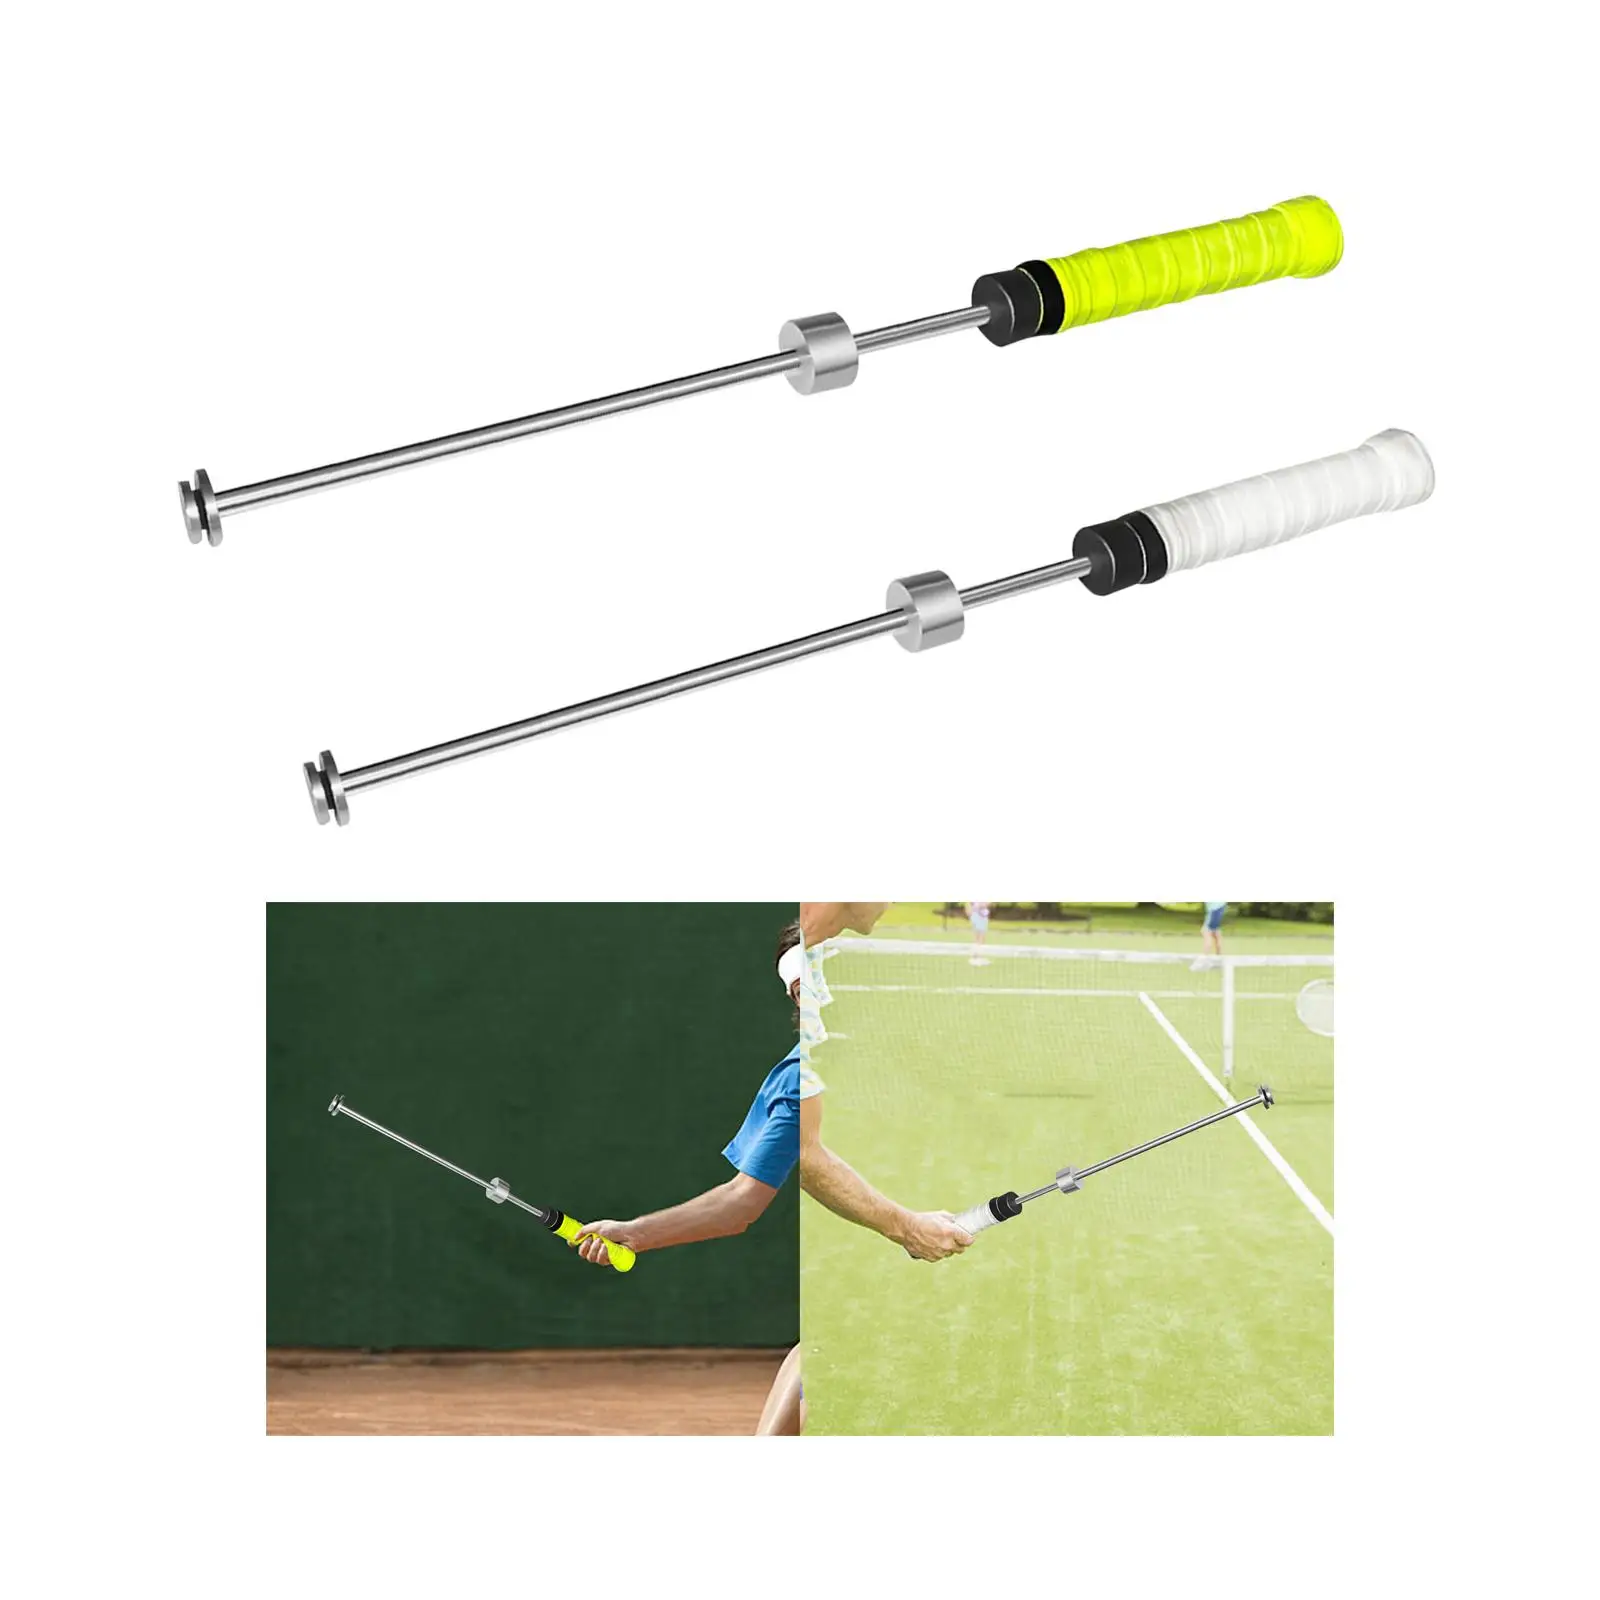 with Sounds Tennis Swing Training Durable Exercise Tennis Swing Trainer Aid